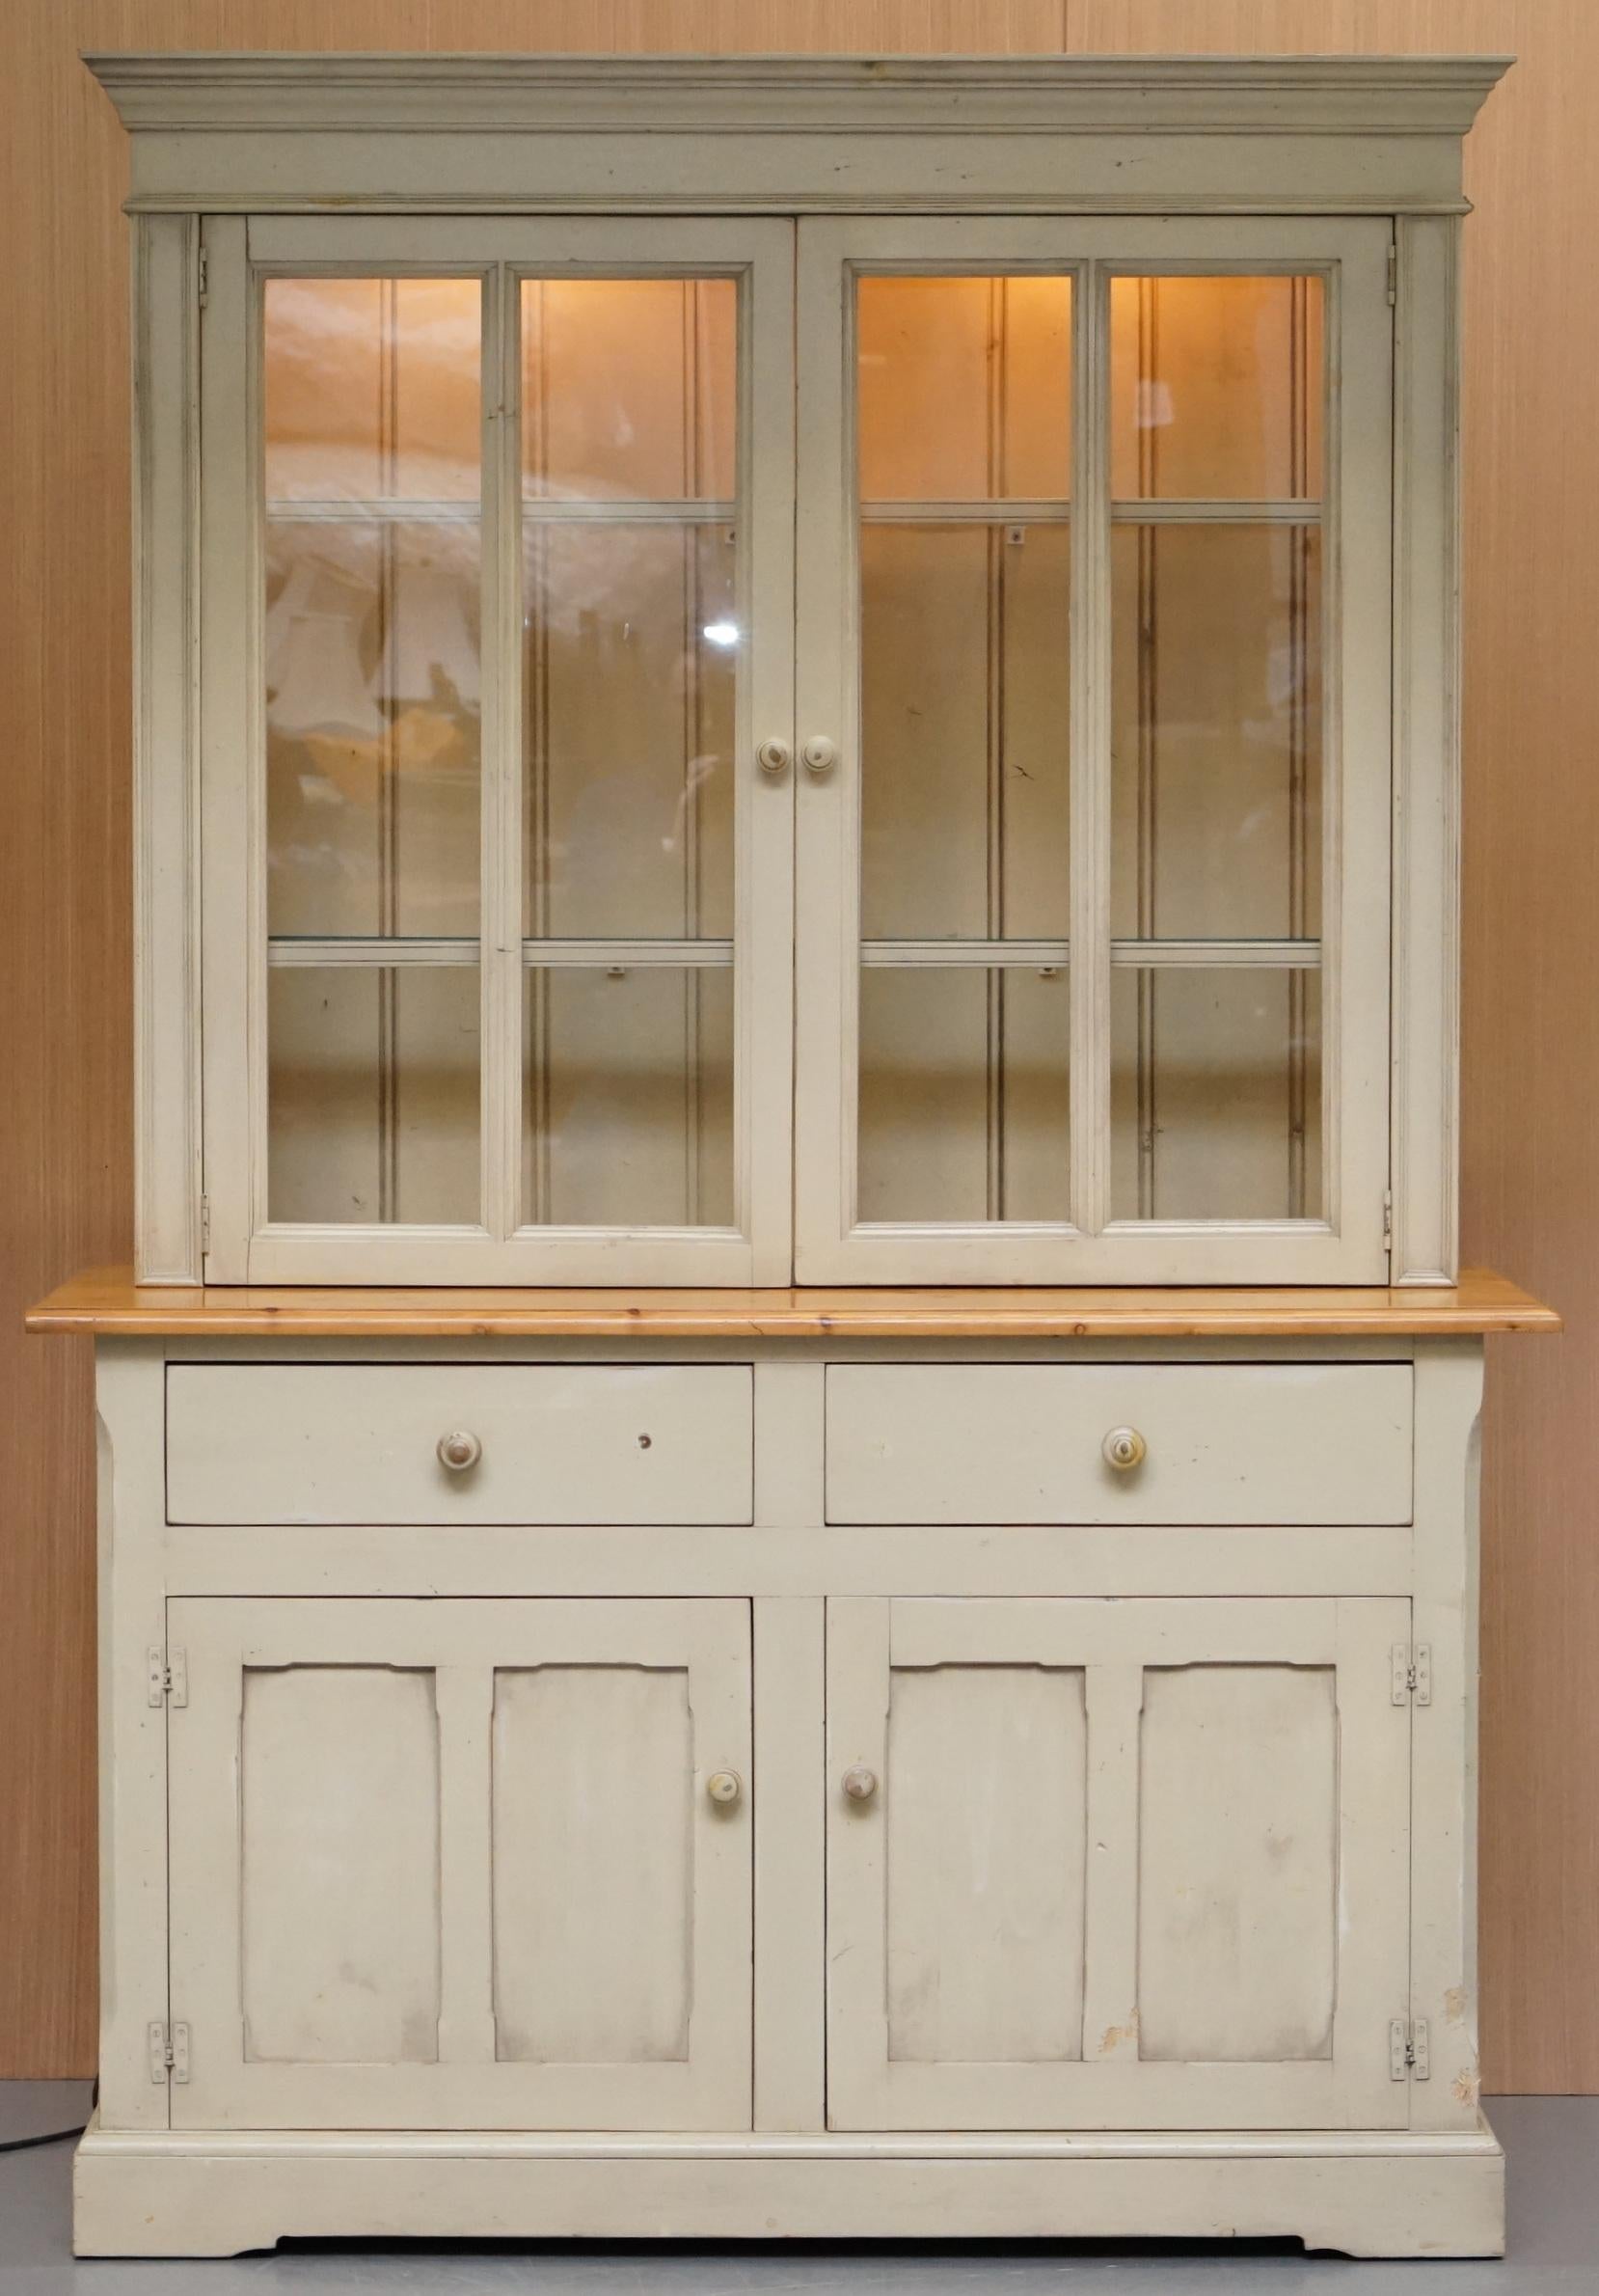 We are delighted to offer for sale this lovely vintage French Farmhouse country style hand painted welsh dresser bookcase with built in lights and glass shelves

A lovely and very well made piece, the top section has twin spot lights, the shelves